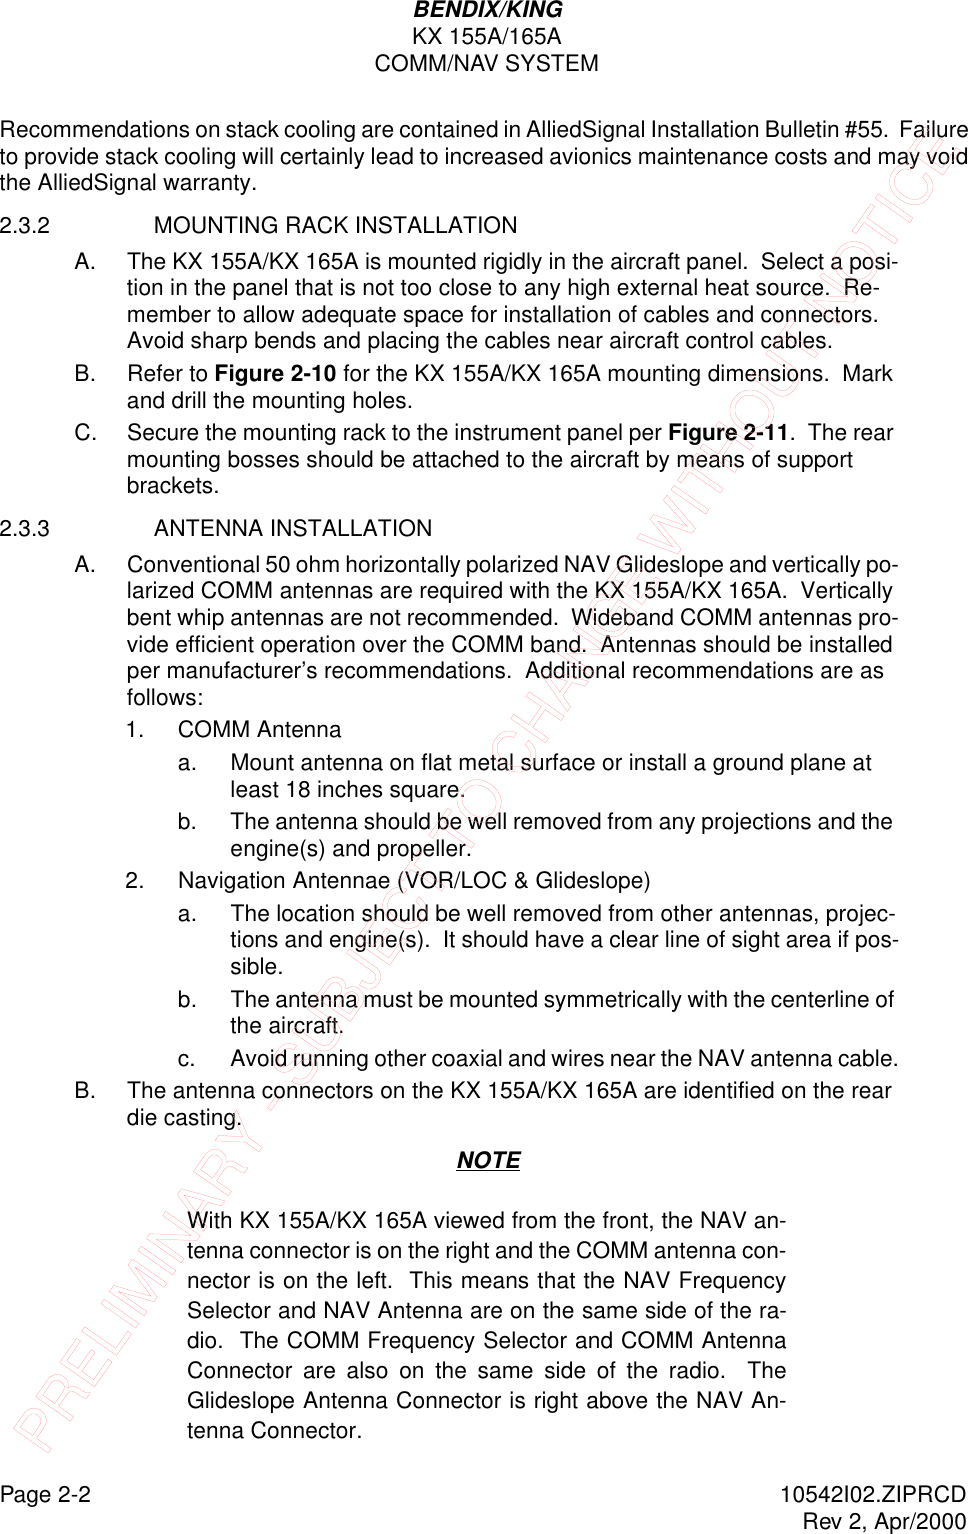 Page 2-2 10542I02.ZIPRCDRev 2, Apr/2000BENDIX/KINGKX 155A/165ACOMM/NAV SYSTEMRecommendations on stack cooling are contained in AlliedSignal Installation Bulletin #55.  Failure to provide stack cooling will certainly lead to increased avionics maintenance costs and may void the AlliedSignal warranty.2.3.2 MOUNTING RACK INSTALLATION A. The KX 155A/KX 165A is mounted rigidly in the aircraft panel.  Select a posi-tion in the panel that is not too close to any high external heat source.  Re-member to allow adequate space for installation of cables and connectors.  Avoid sharp bends and placing the cables near aircraft control cables.B. Refer to Figure 2-10 for the KX 155A/KX 165A mounting dimensions.  Mark and drill the mounting holes.C. Secure the mounting rack to the instrument panel per Figure 2-11.  The rear mounting bosses should be attached to the aircraft by means of support brackets.2.3.3 ANTENNA INSTALLATION A. Conventional 50 ohm horizontally polarized NAV Glideslope and vertically po-larized COMM antennas are required with the KX 155A/KX 165A.  Vertically bent whip antennas are not recommended.  Wideband COMM antennas pro-vide efficient operation over the COMM band.  Antennas should be installed per manufacturer’s recommendations.  Additional recommendations are as follows:1. COMM Antennaa. Mount antenna on flat metal surface or install a ground plane at least 18 inches square.b. The antenna should be well removed from any projections and the engine(s) and propeller.2. Navigation Antennae (VOR/LOC &amp; Glideslope)a. The location should be well removed from other antennas, projec-tions and engine(s).  It should have a clear line of sight area if pos-sible.b. The antenna must be mounted symmetrically with the centerline of the aircraft.c. Avoid running other coaxial and wires near the NAV antenna cable.B. The antenna connectors on the KX 155A/KX 165A are identified on the rear die casting. NOTEWith KX 155A/KX 165A viewed from the front, the NAV an-tenna connector is on the right and the COMM antenna con-nector is on the left.  This means that the NAV FrequencySelector and NAV Antenna are on the same side of the ra-dio.  The COMM Frequency Selector and COMM AntennaConnector are also on the same side of the radio.  TheGlideslope Antenna Connector is right above the NAV An-tenna Connector.PRELIMINARY - SUBJECT TO CHANGE WITHOUT NOTICE